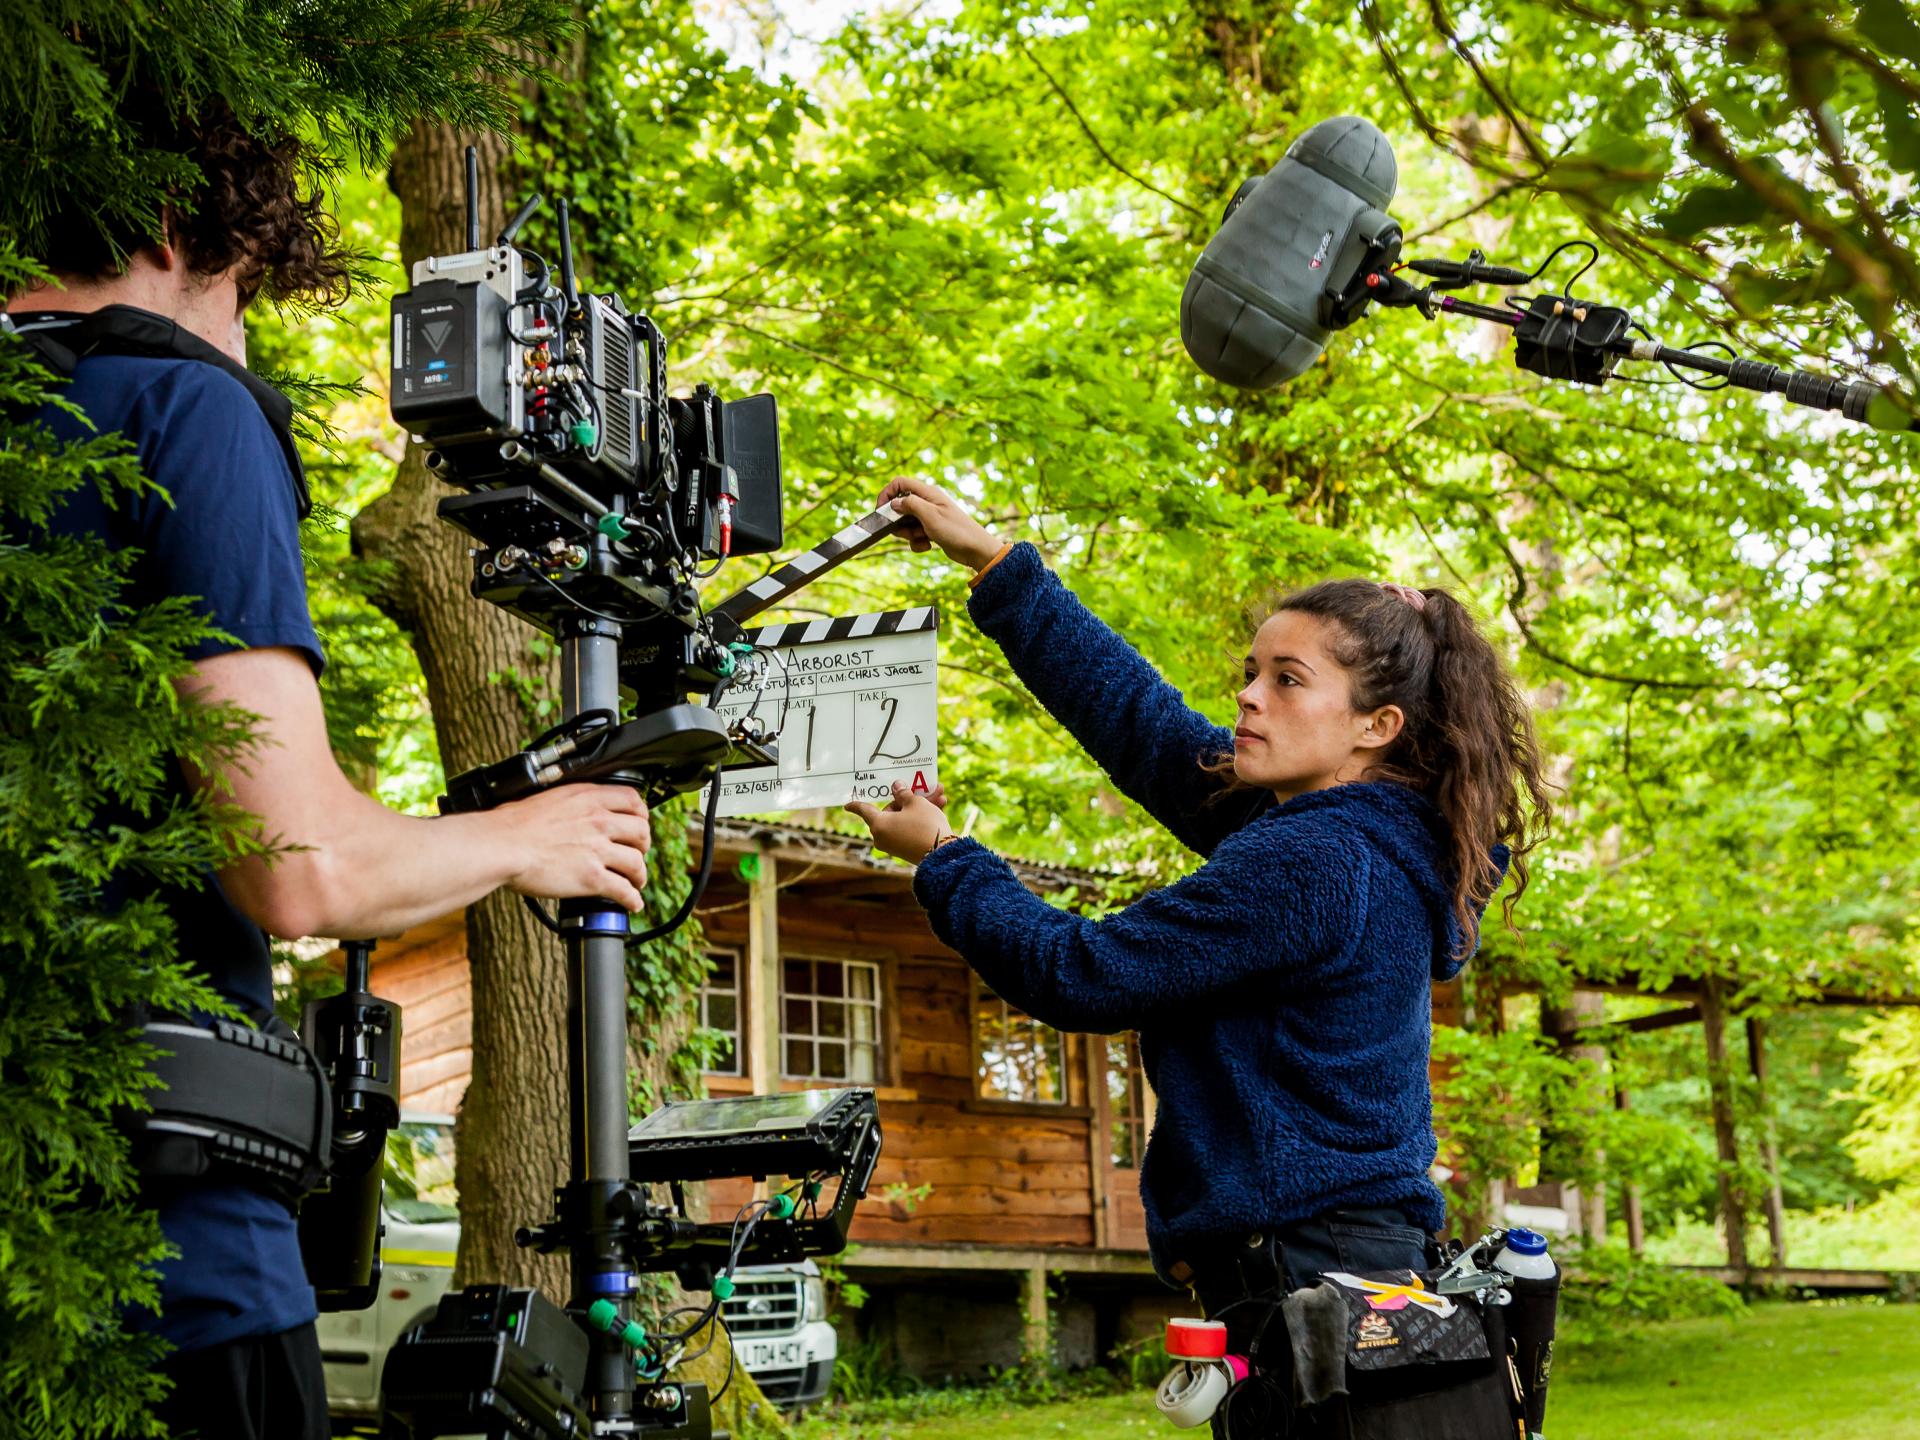 Man holding a camera and women holding a clapperboard in the forest. Credit: Arborist - Tom Sparey